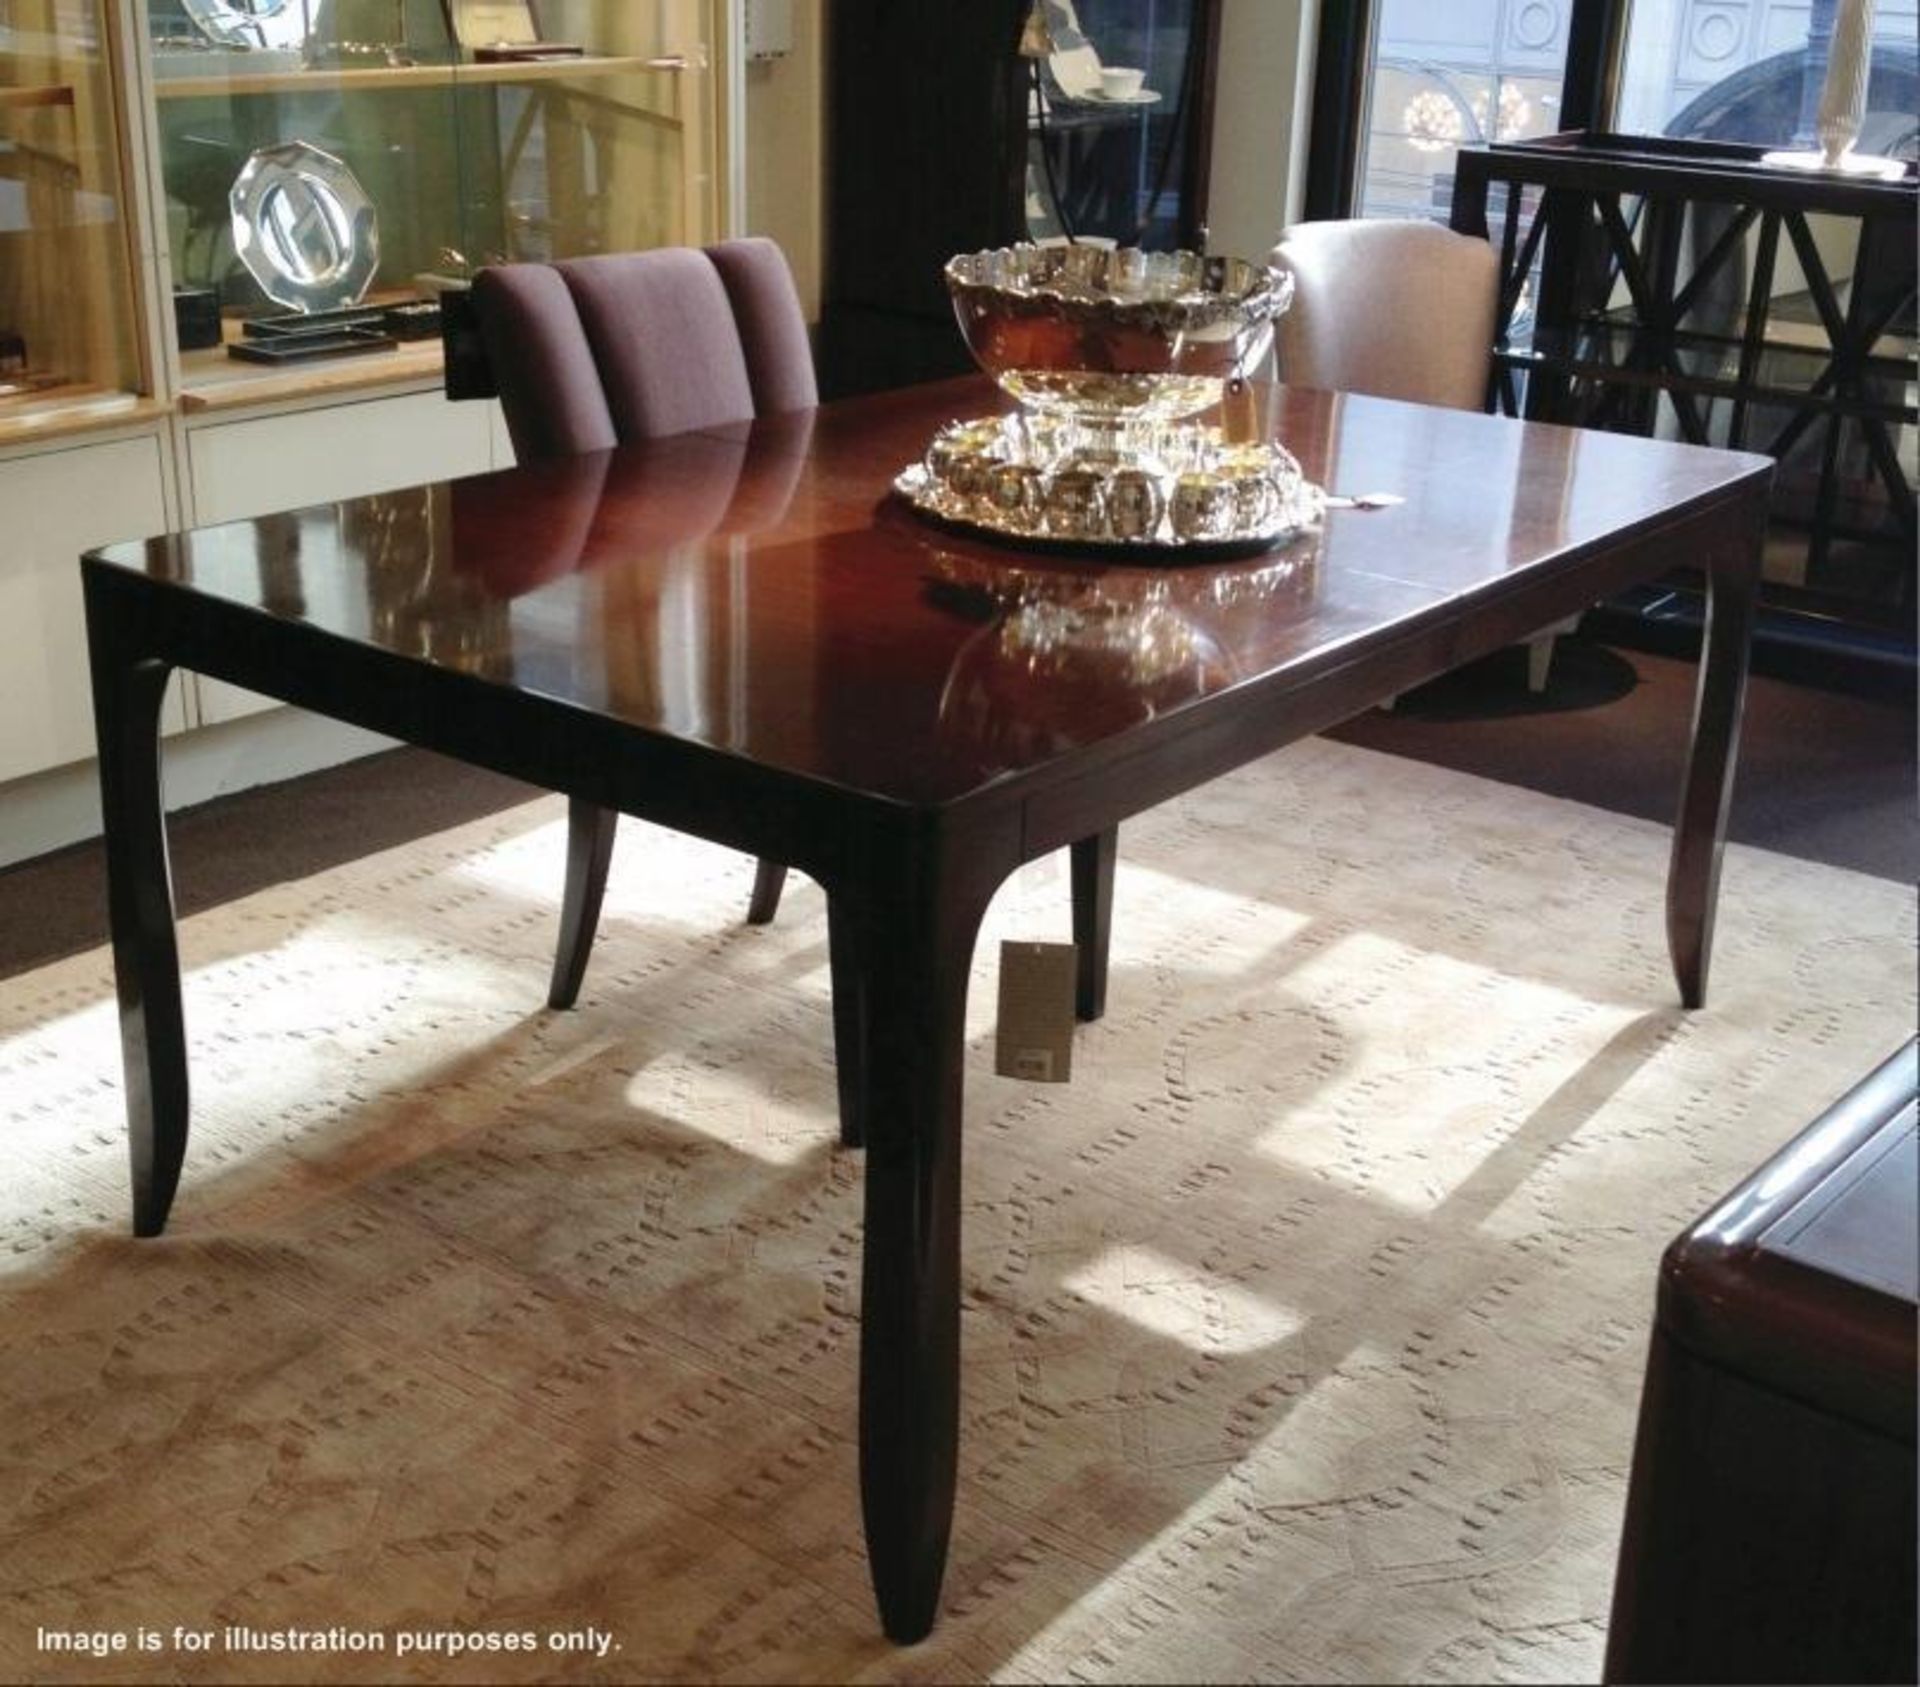 1 x BARBARA BARRY "Perfect Parsons" Dining Table In Dark Walnut&nbsp; - Includes Extensions Leaves -